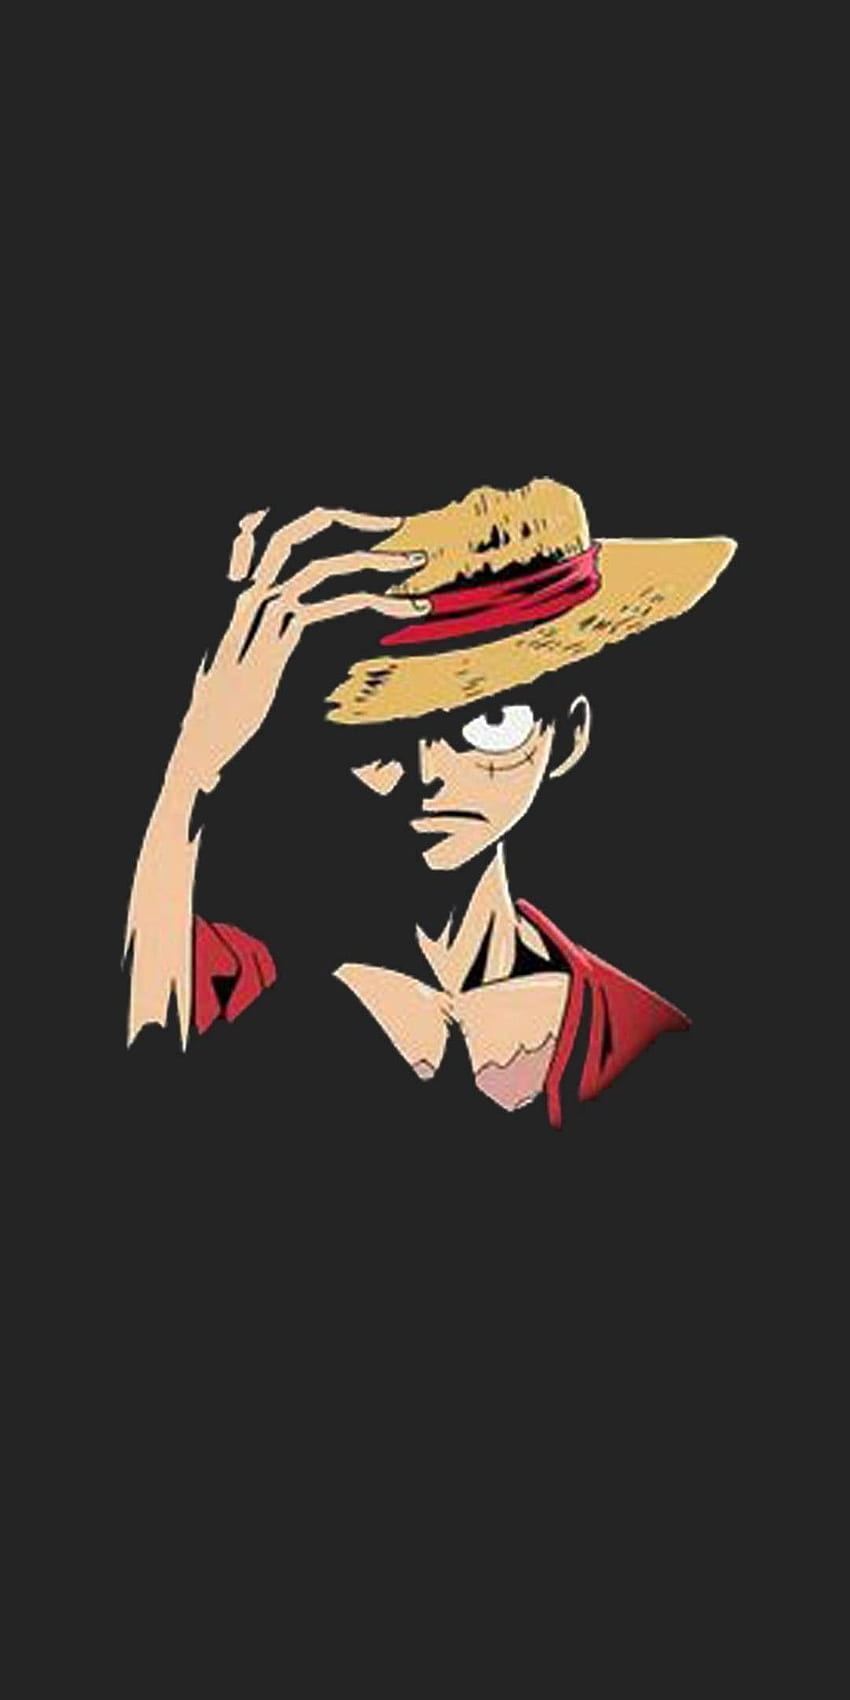 monkey d luffy iPhone Wallpapers Free Download